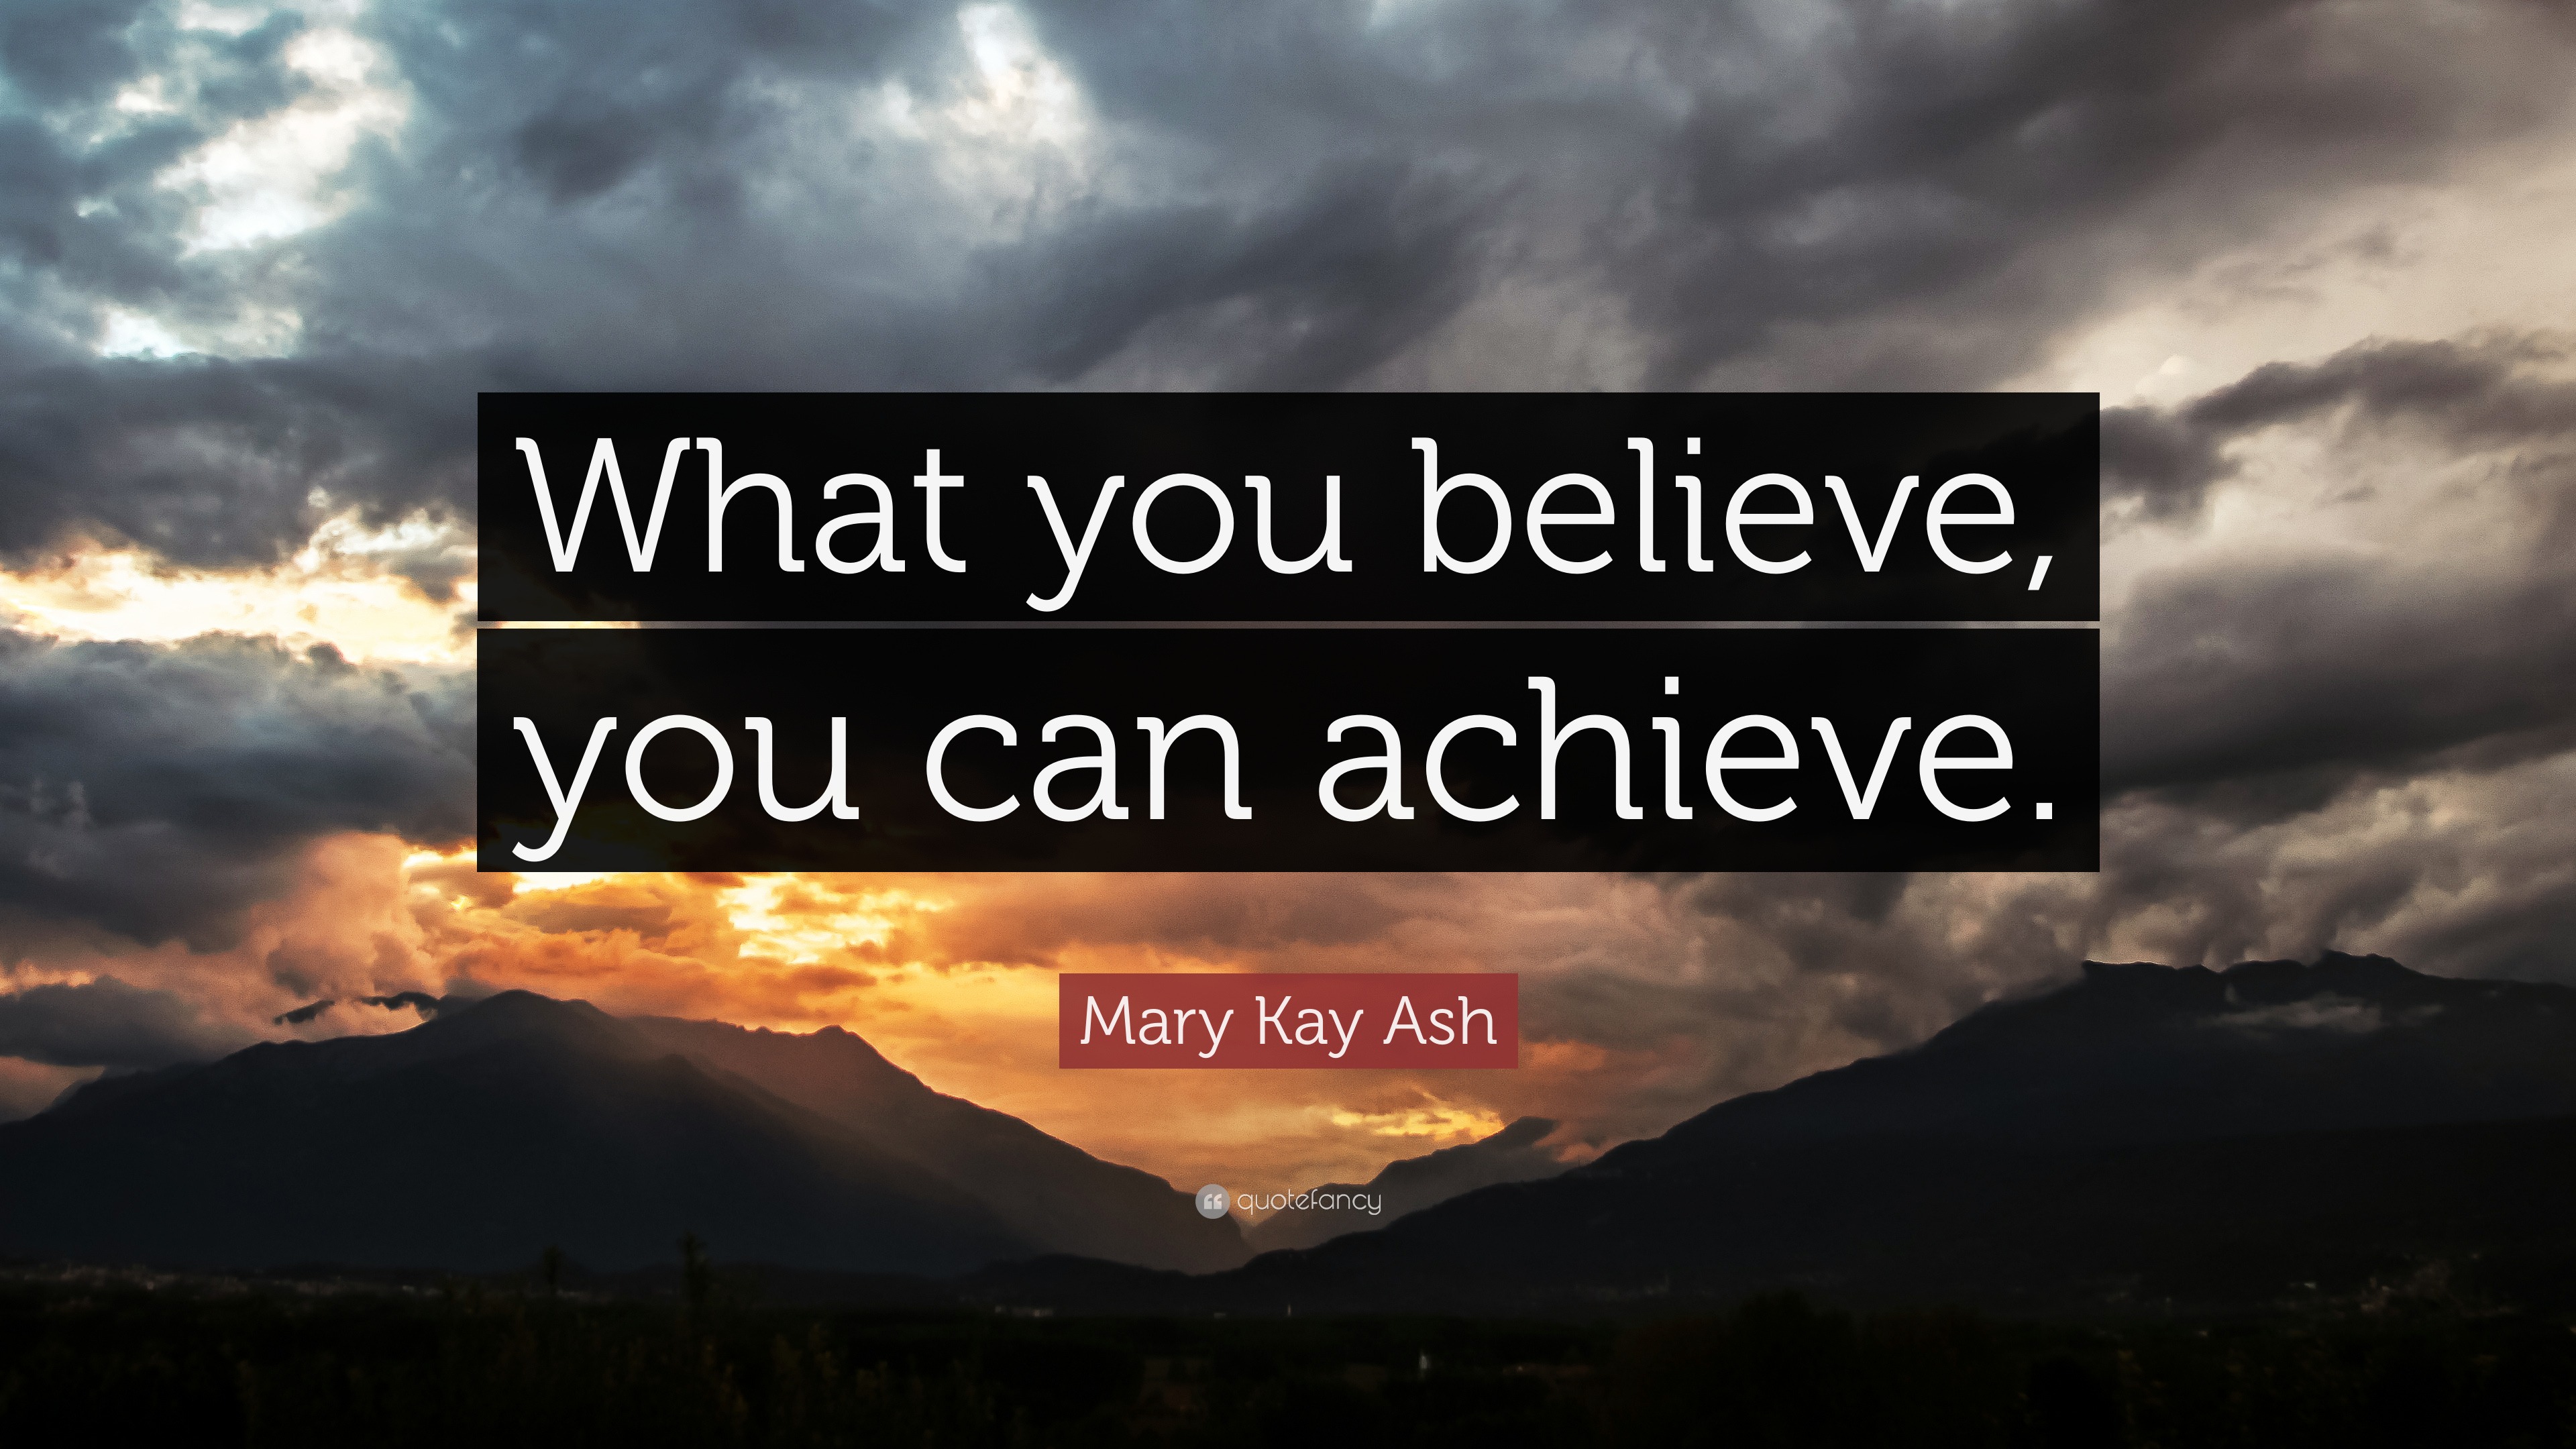 Mary Kay Ash Quote: “What you believe, you can achieve.” (11 wallpapers